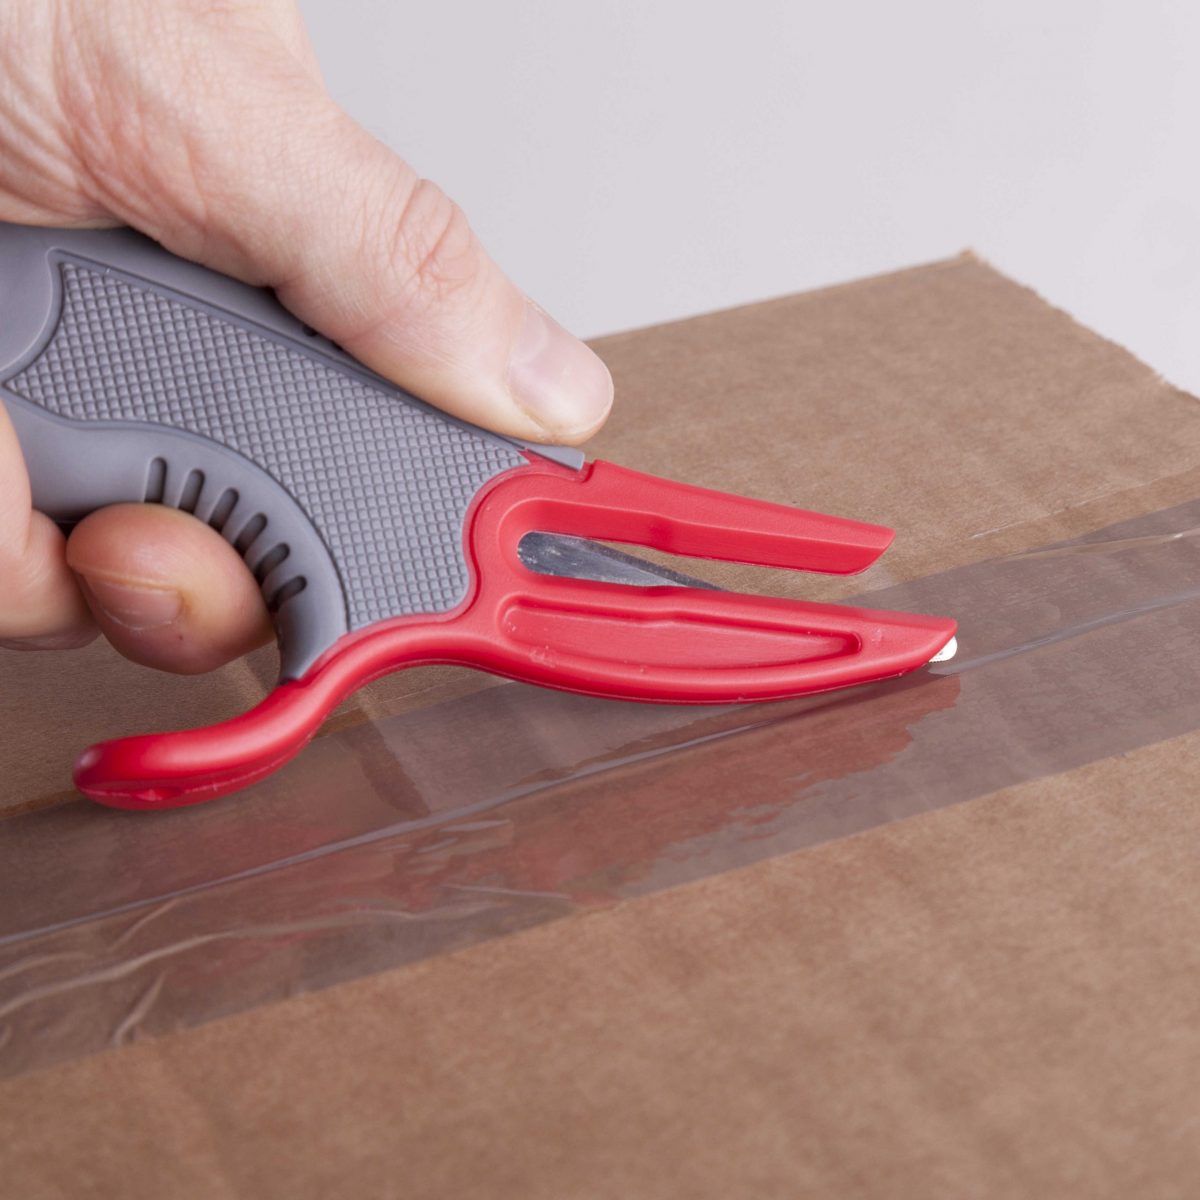 Ergonomic Safety Knife For Film And Strapping